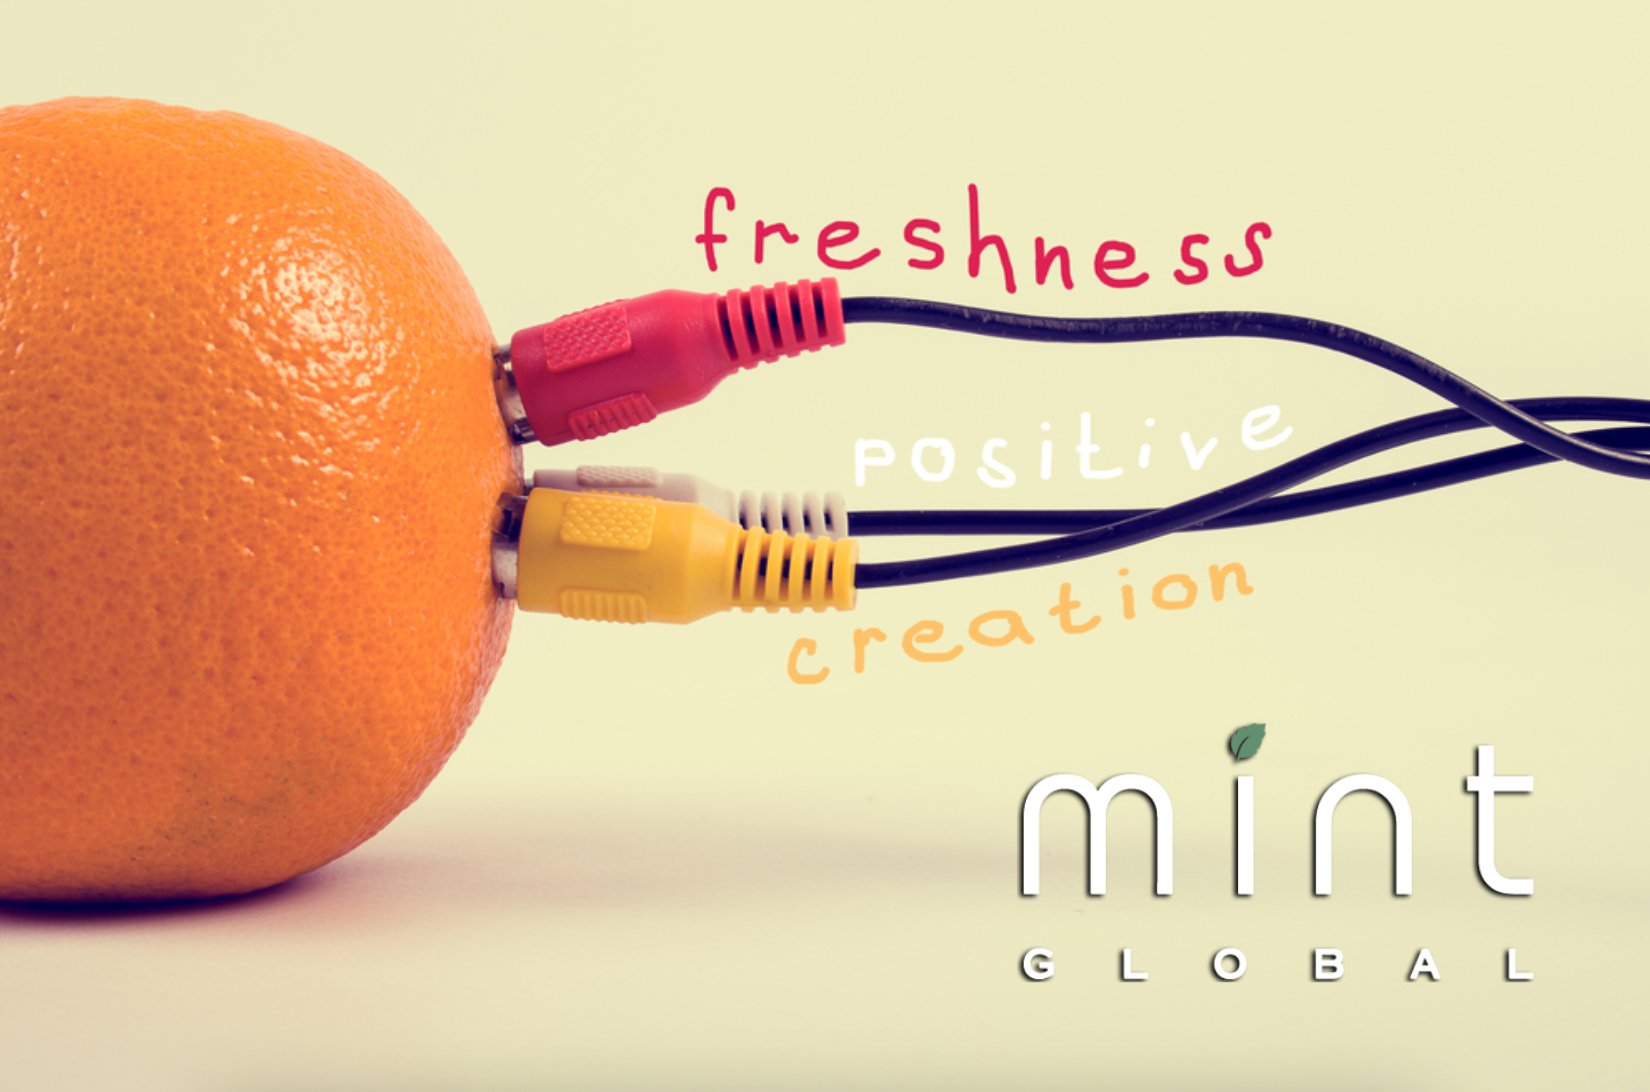 An orange with a stethoscope around it

Description automatically generated with medium confidence